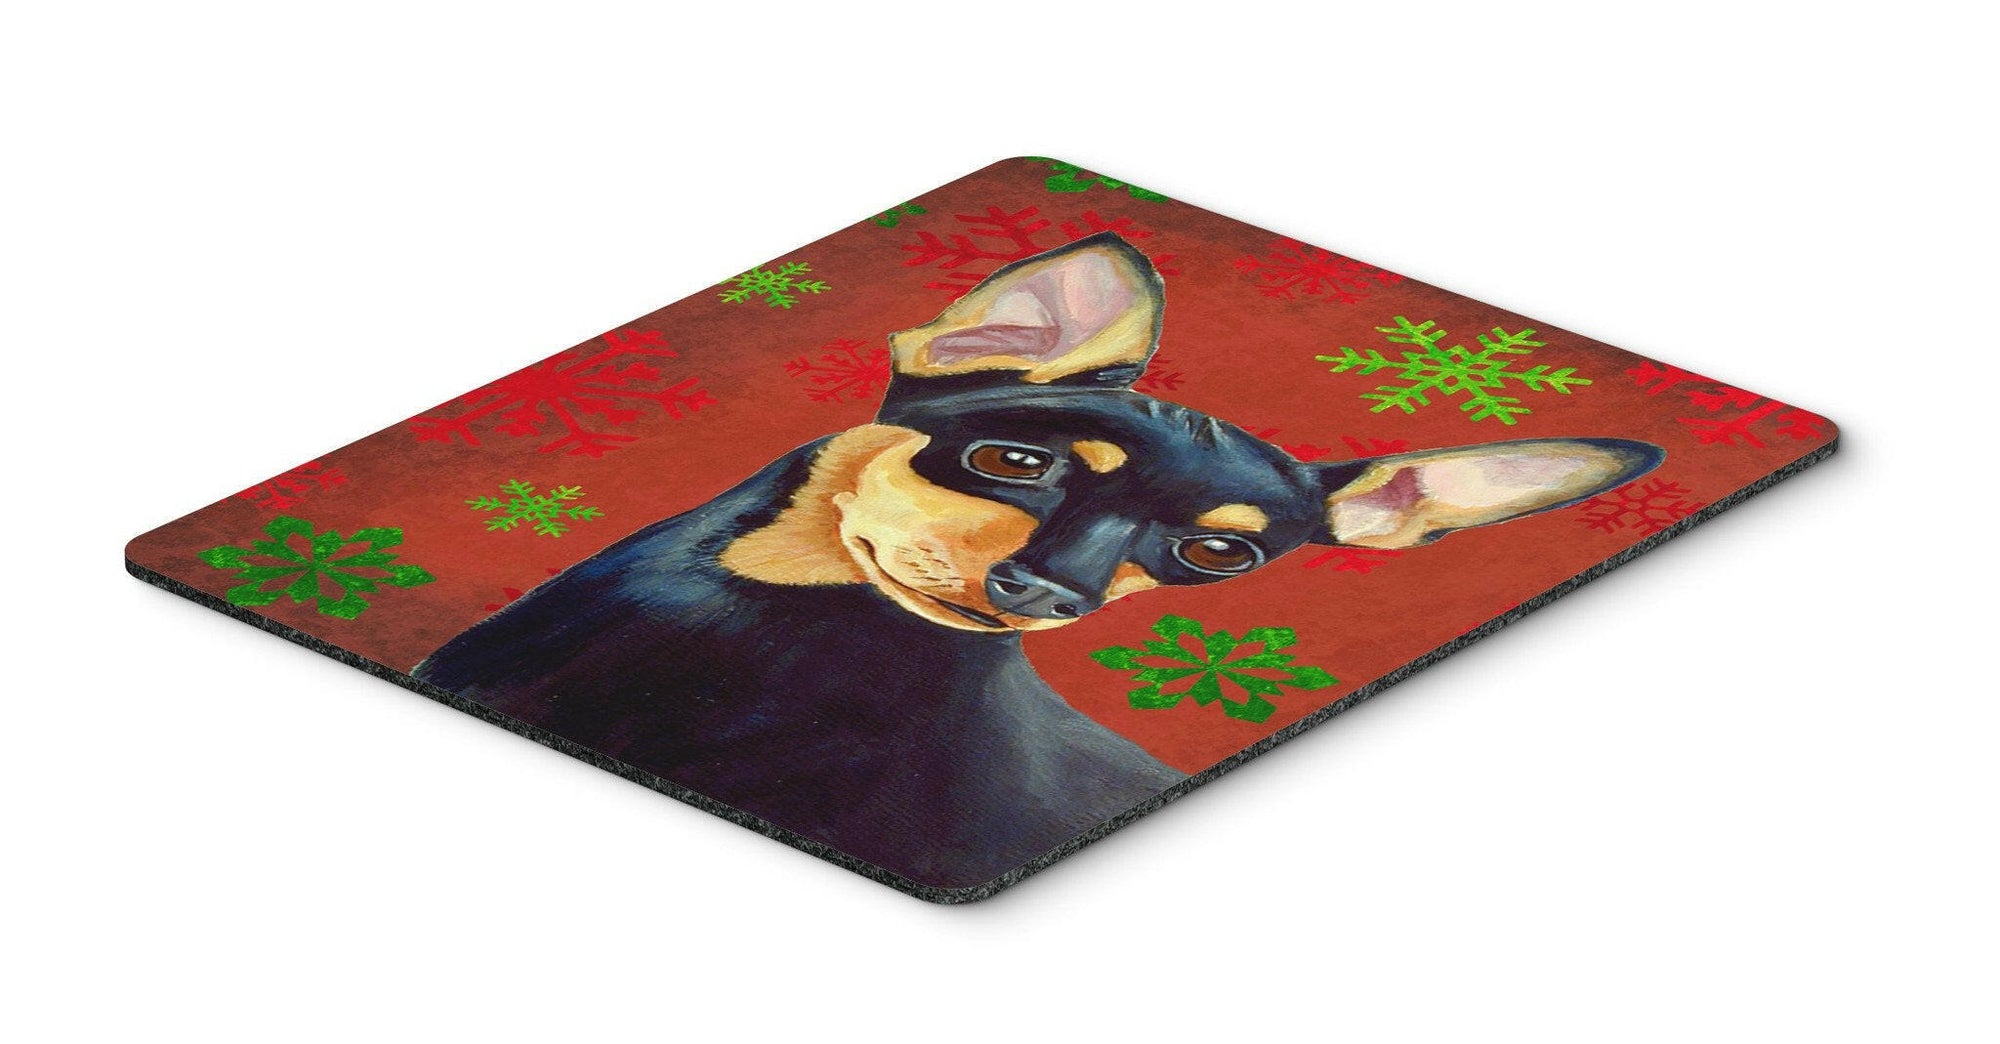 Min Pin Red and Green Snowflakes Holiday Christmas Mouse Pad, Hot Pad or Trivet by Caroline's Treasures